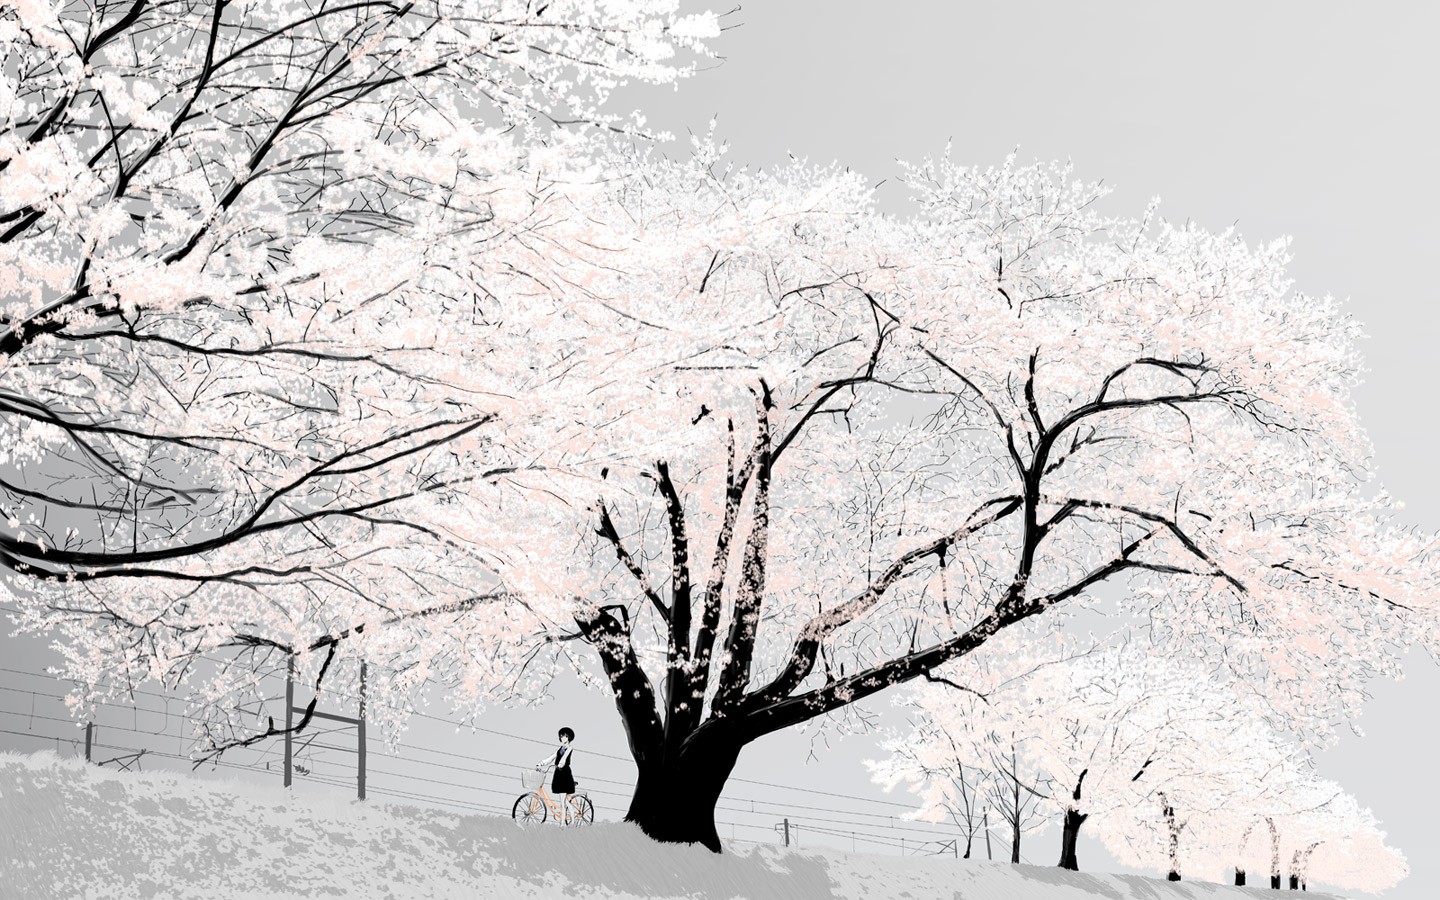 Anime 1440x900 trees snow winter anime girls anime bicycle women outdoors women with bicycles outdoors